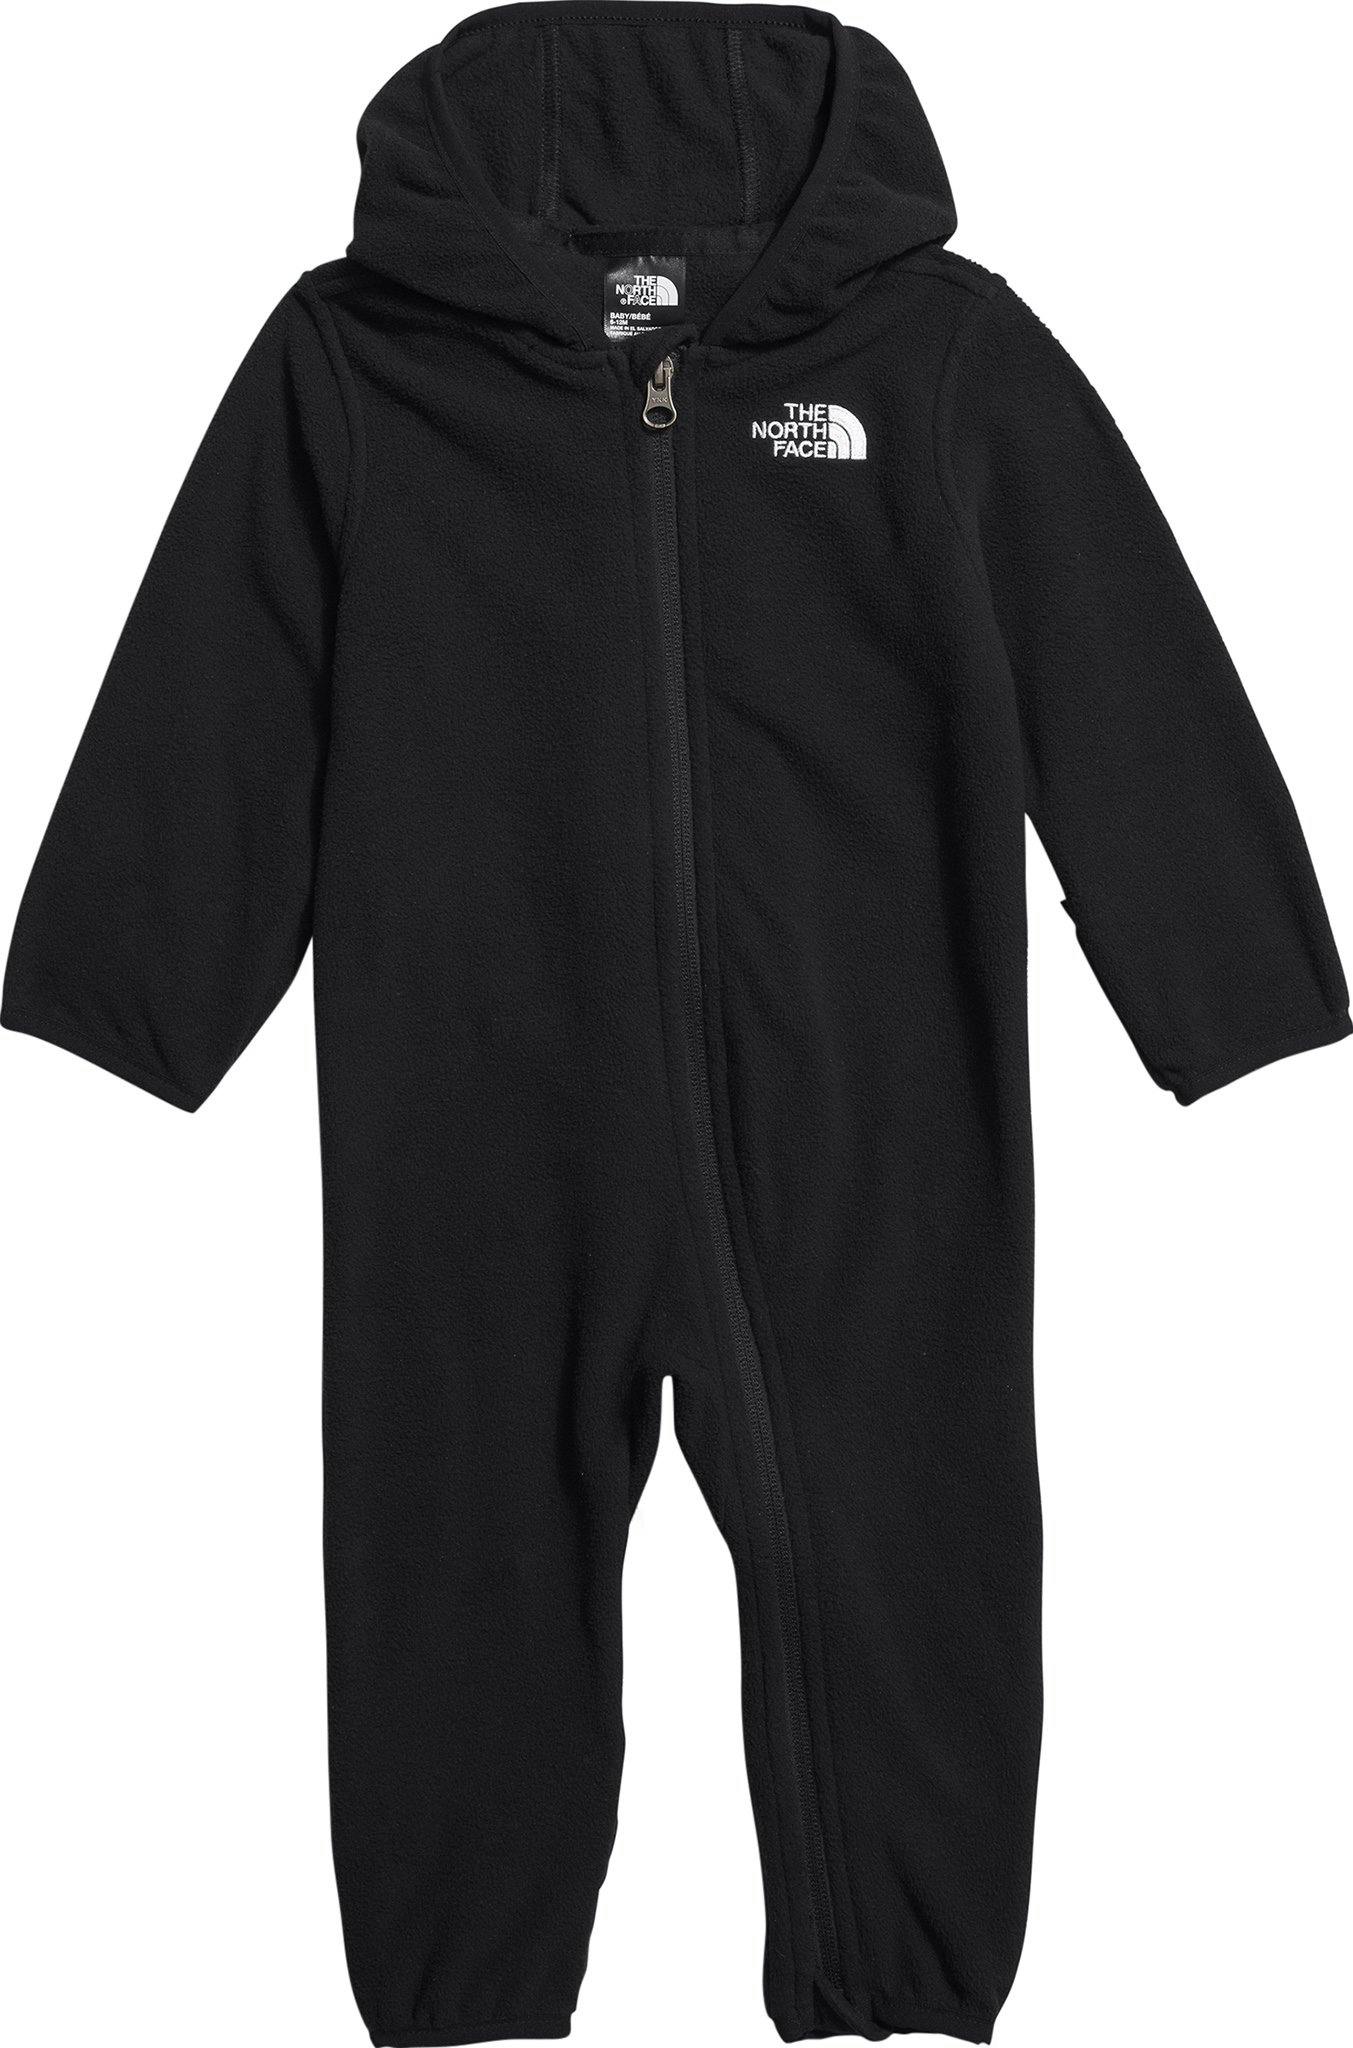 Product image for Glacier One Piece - Baby